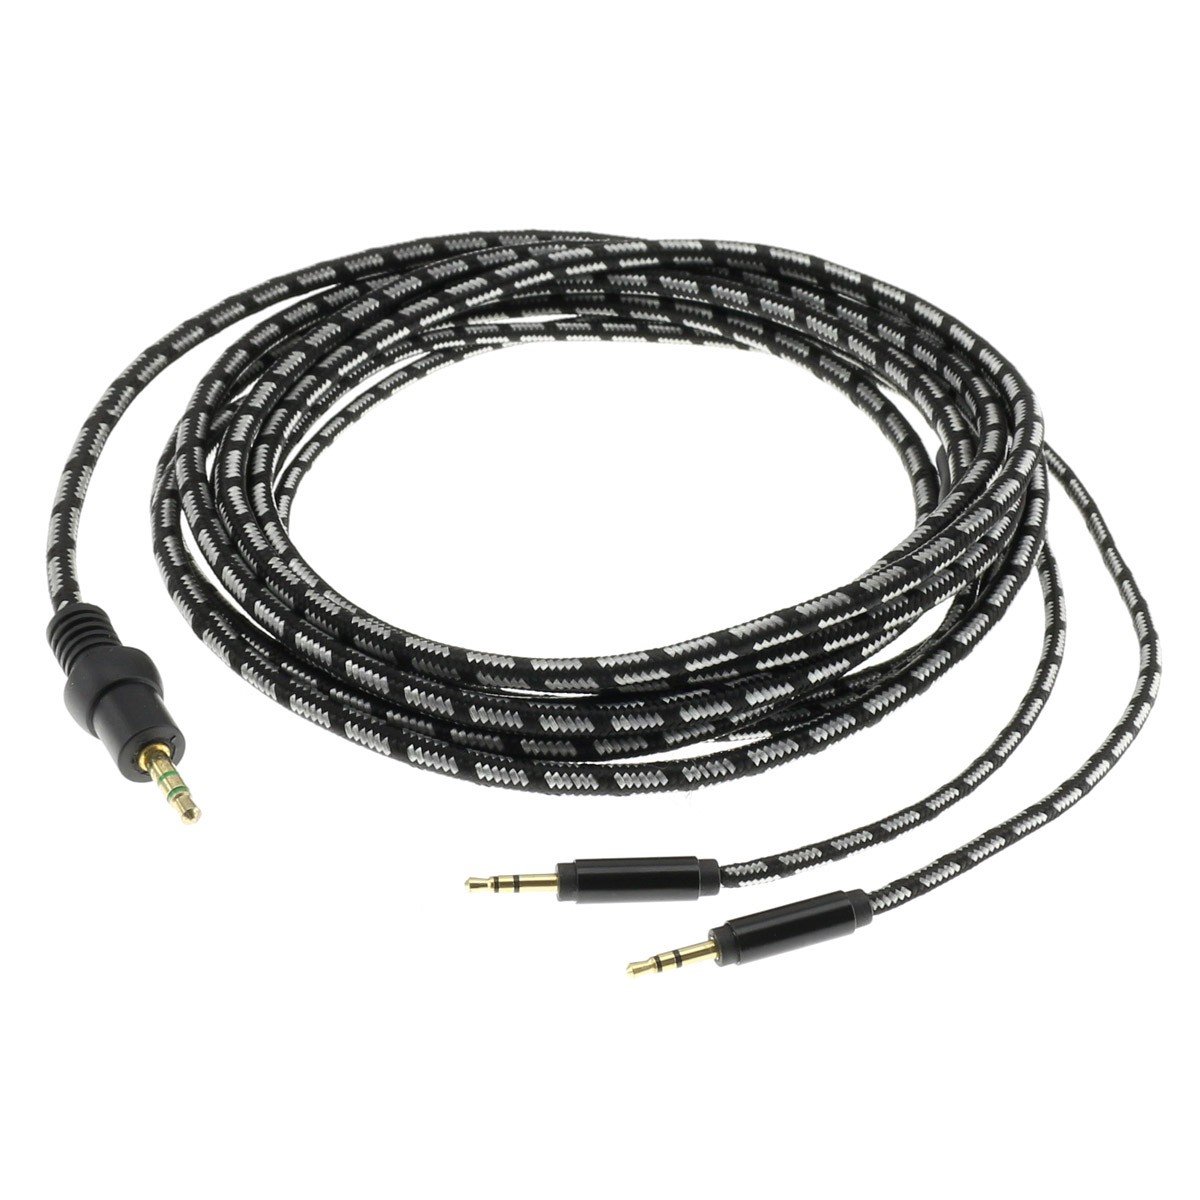 HIFIMAN Hybrid Cable Jack 3.5mm to 2x Jack 2.5mm for HIFIMAN Headphones HE Series OFC Copper 3m